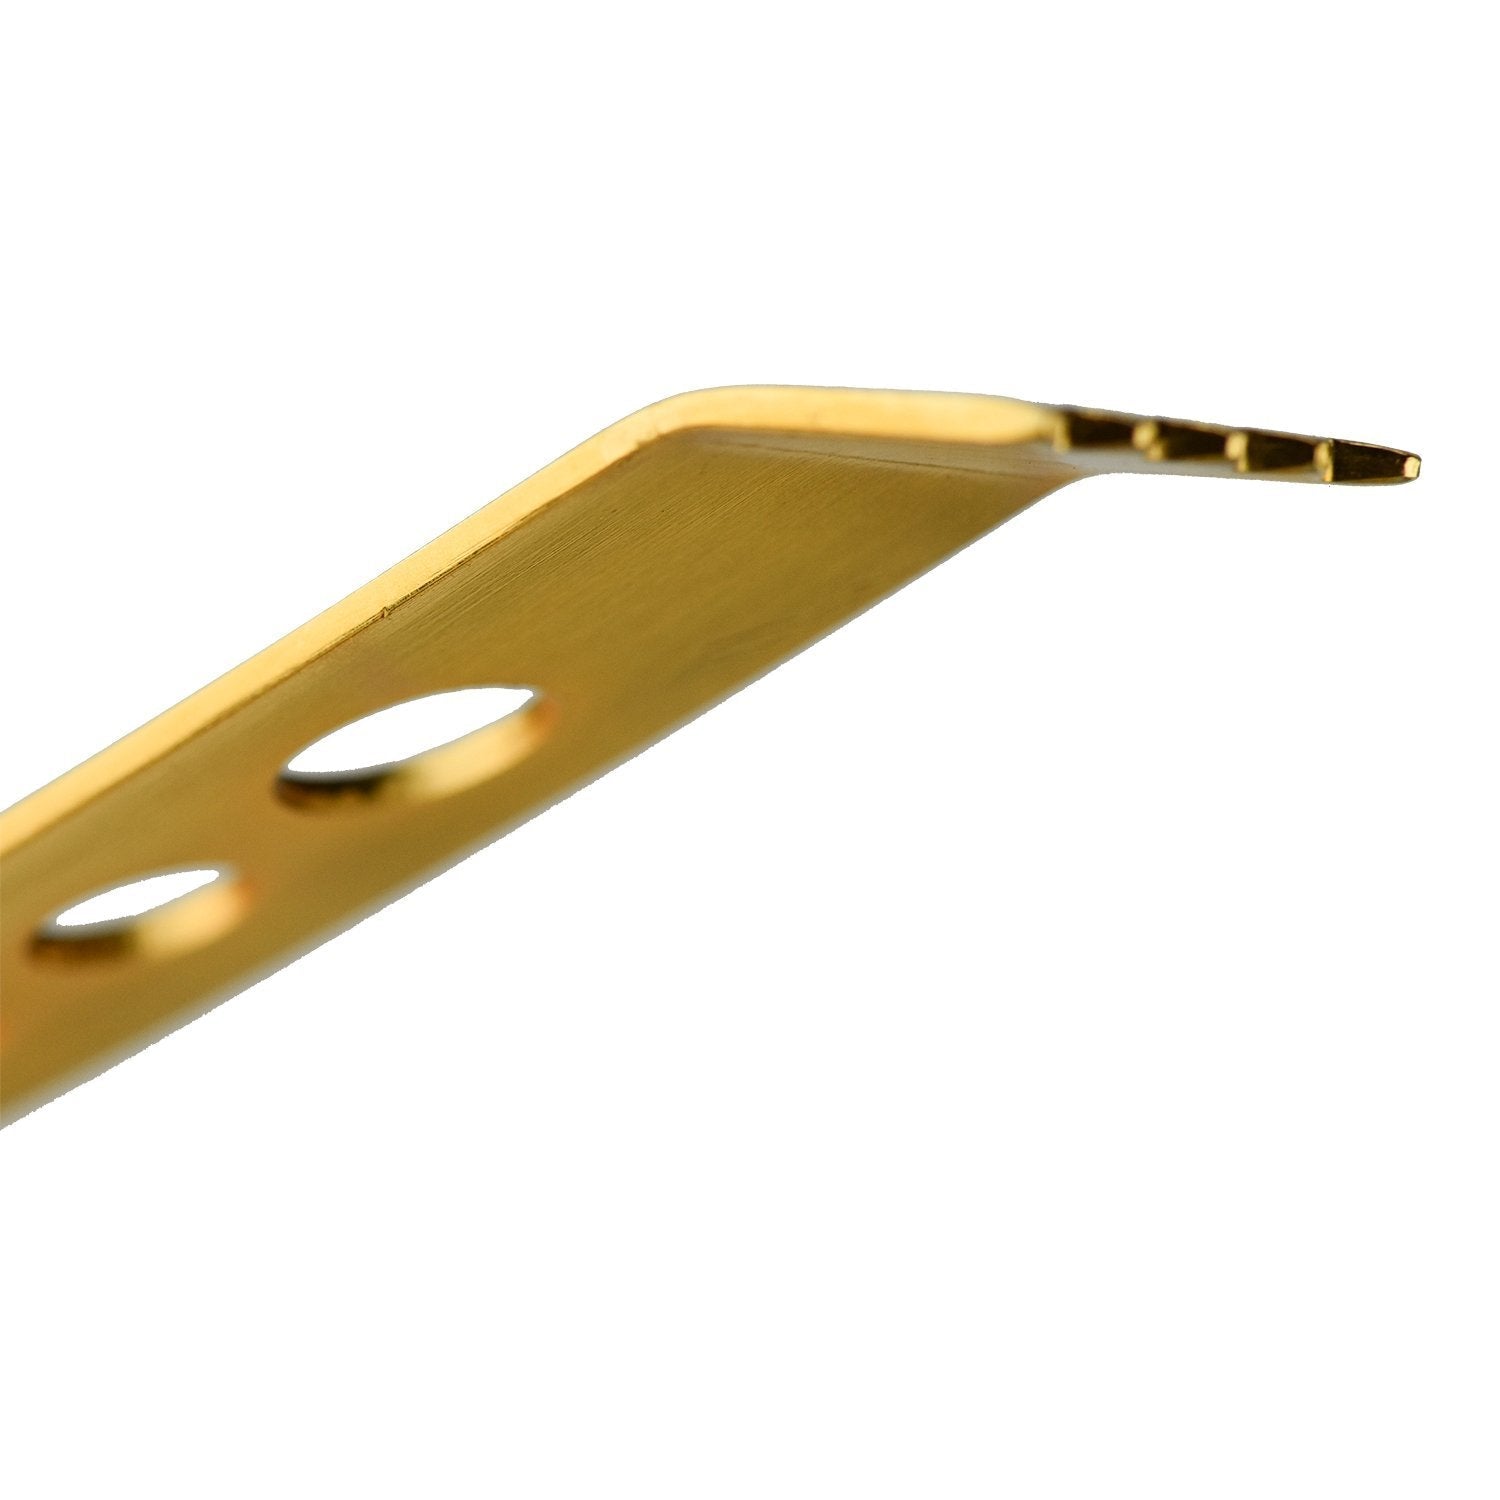 Prince of Scots 24K Gold-Plate Ice Tongs-Barware-Prince of Scots-634934463695-BarIceTong24K-Prince of Scots